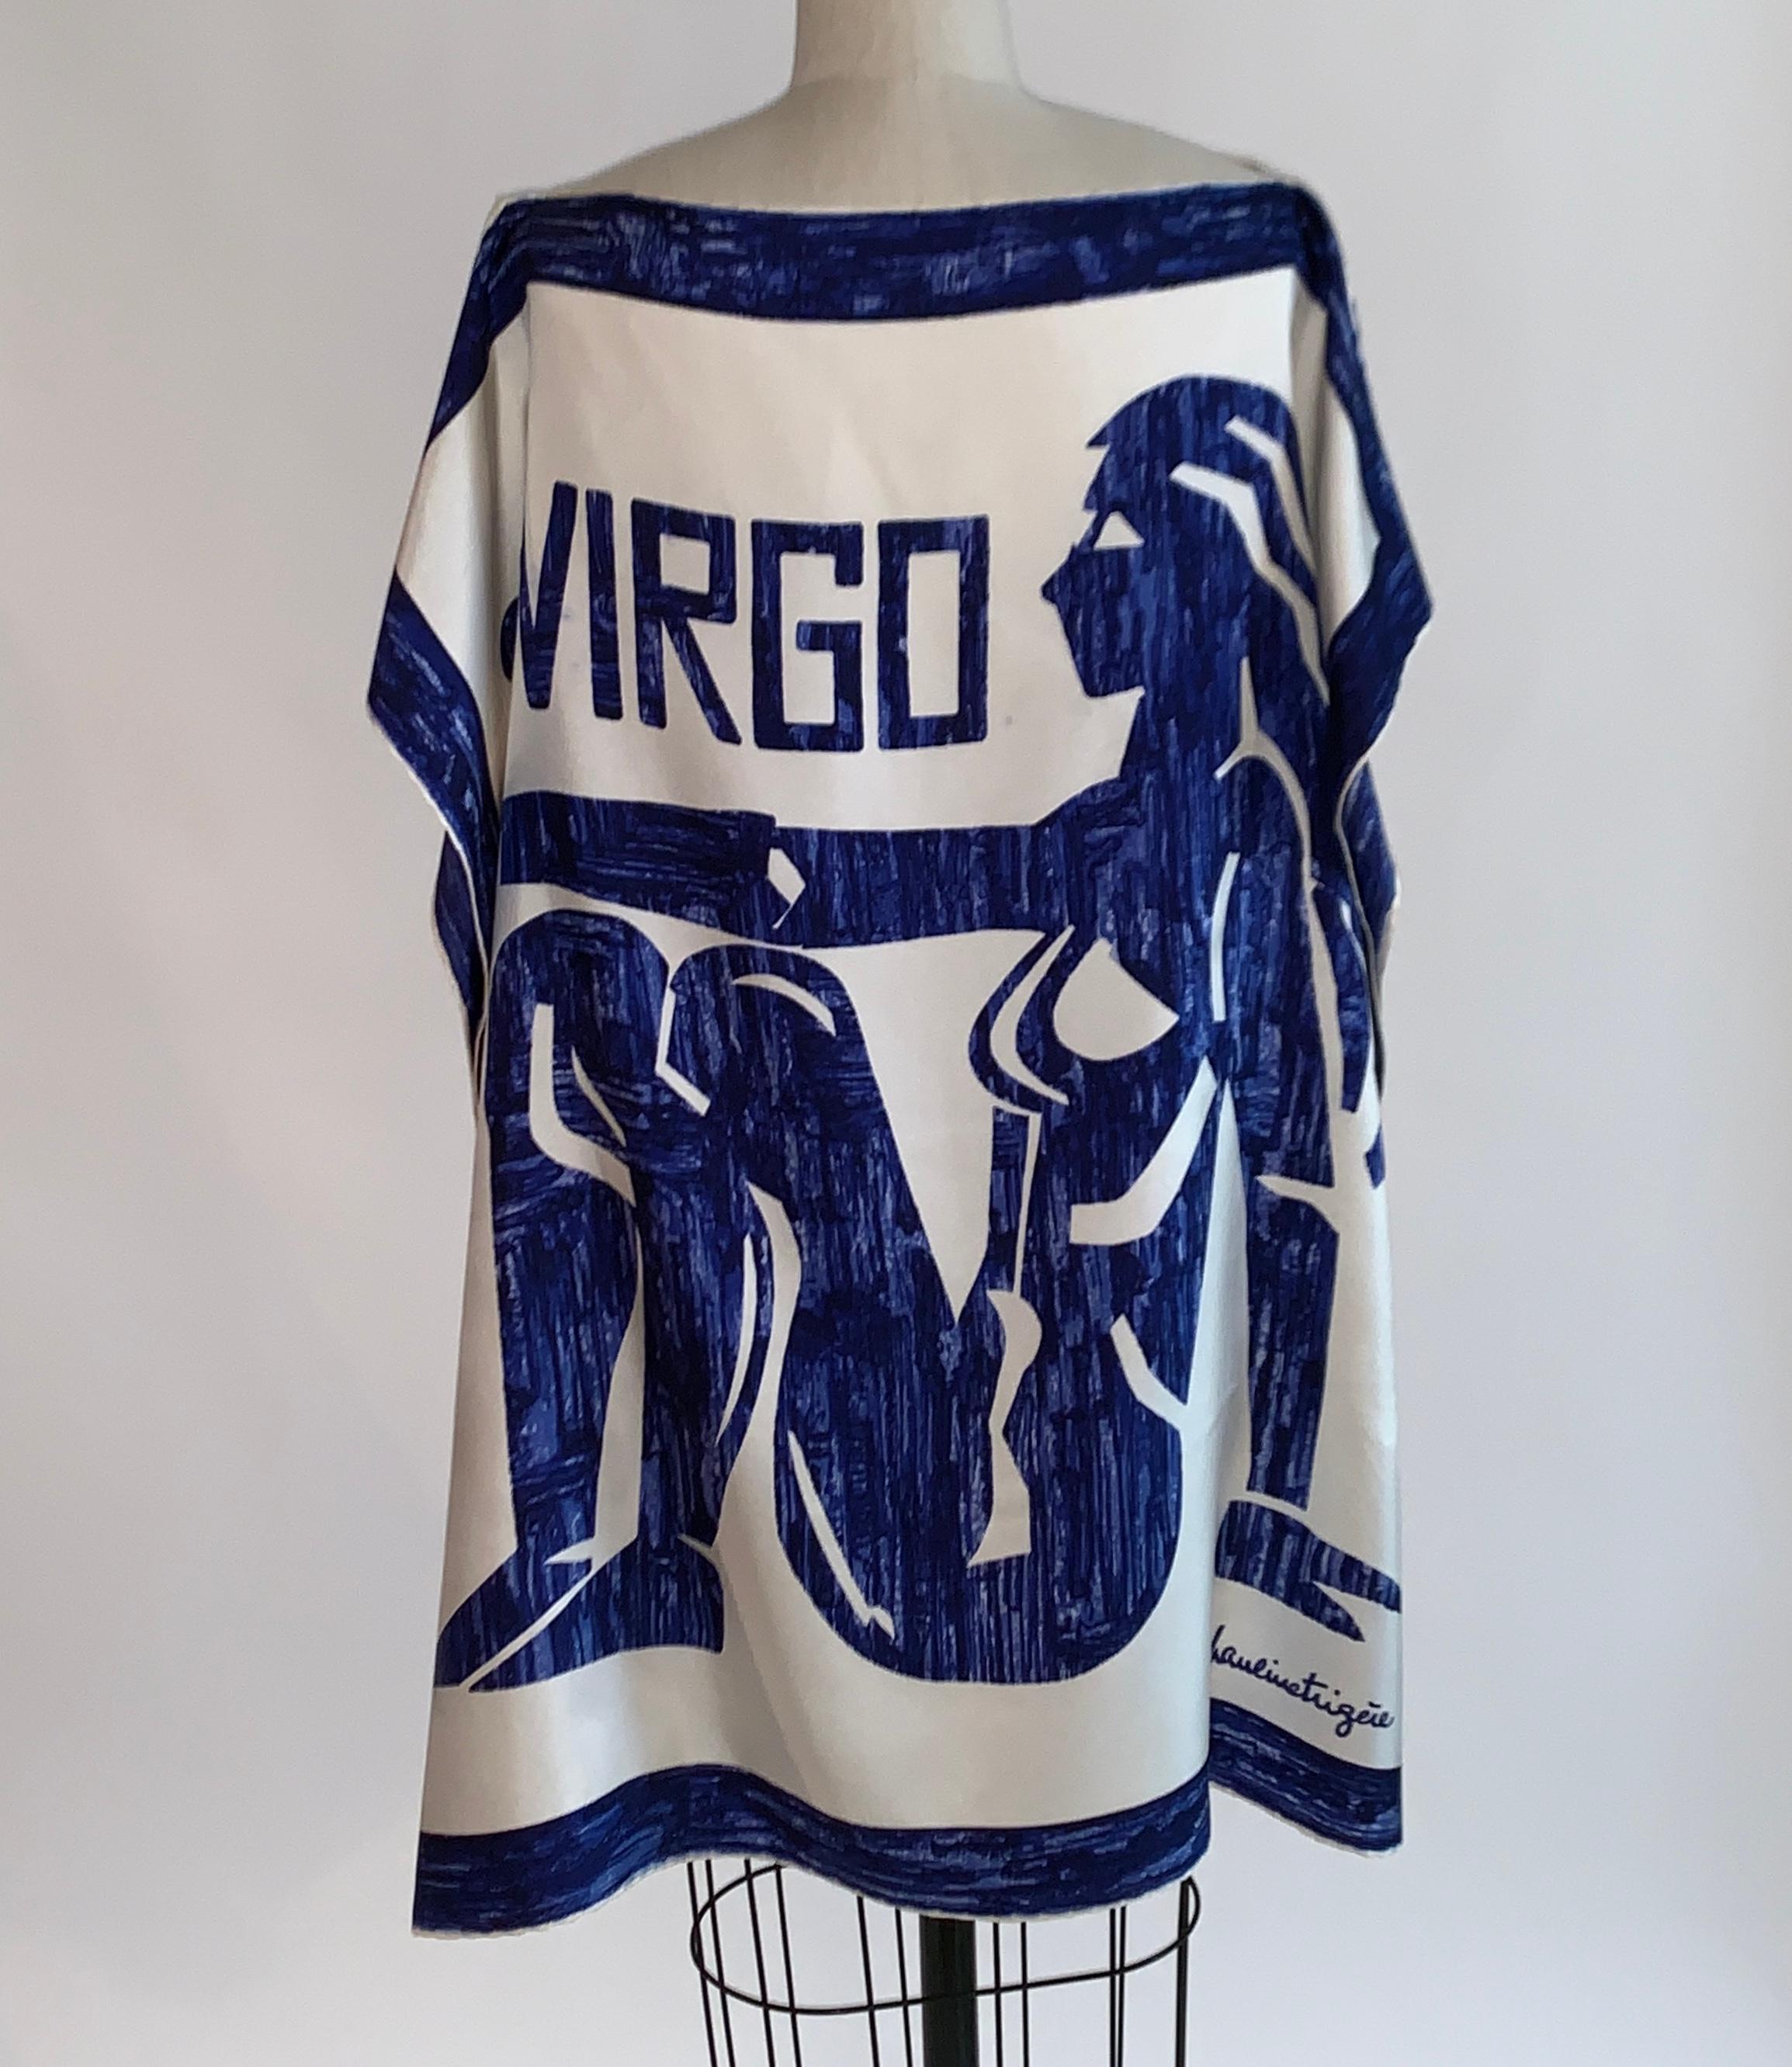 Pauline Trigere 1970s blue and white silk top comprised of two horoscope zodiac virgo scarves stitched together at shoulders and sides to create a shirt. Perfect for a beach cover up! 

Signed Pauline Trigere in lower corner on each scarf. 

One